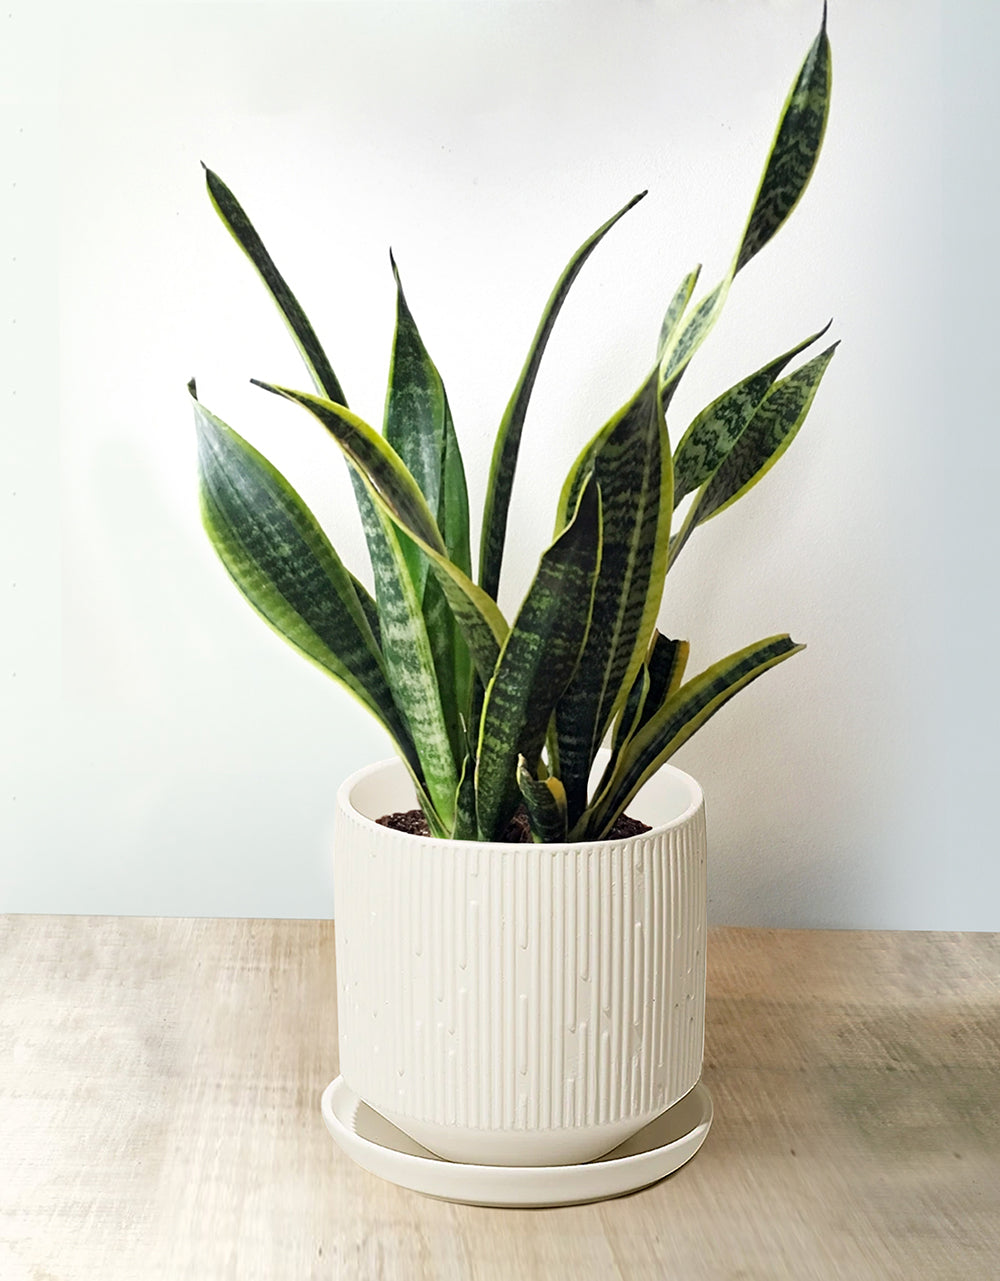 Snake Plant - Easy Plants to Start with